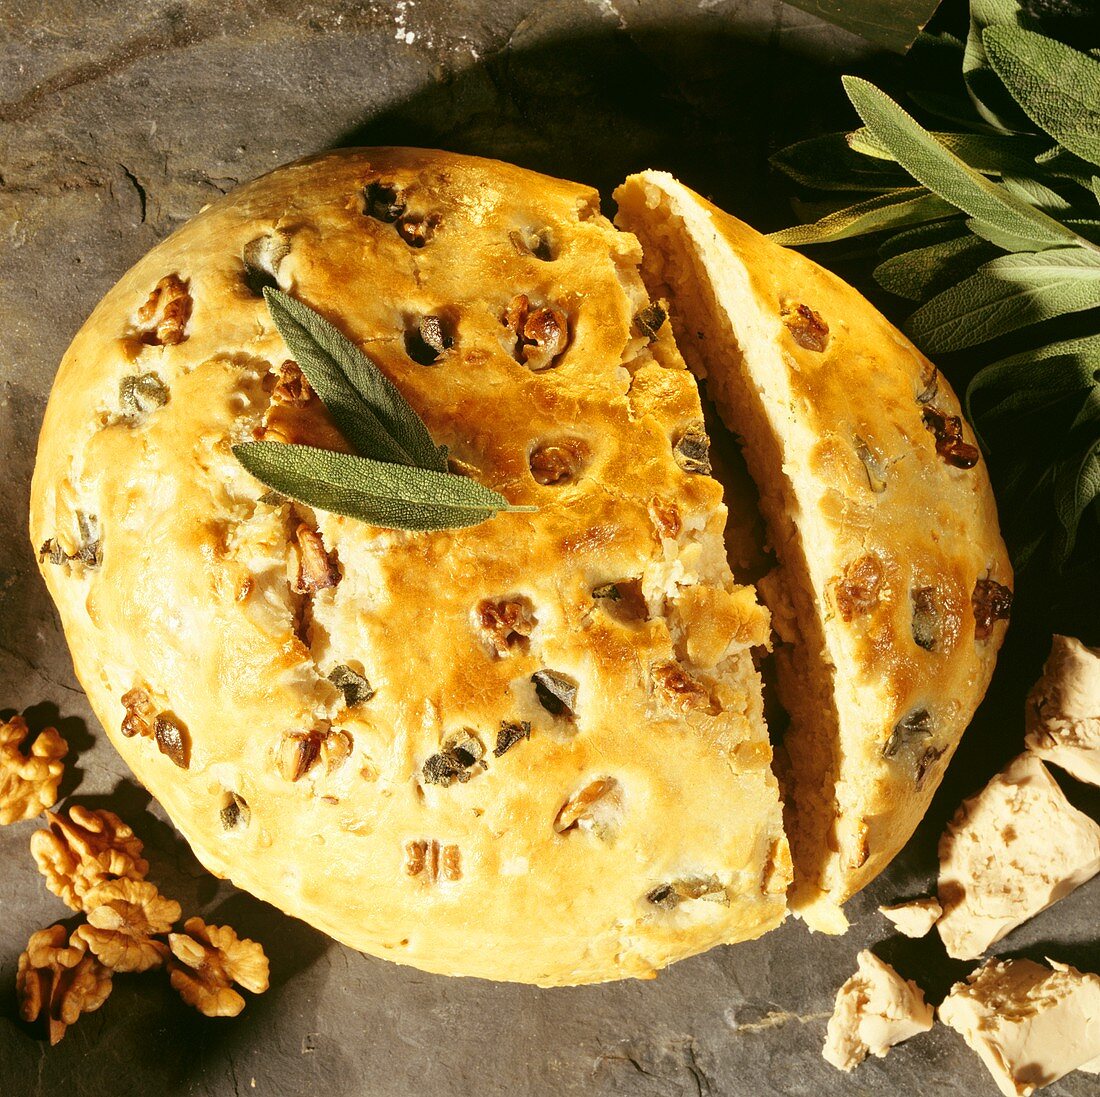 Light Tuscan bread with olives and walnuts